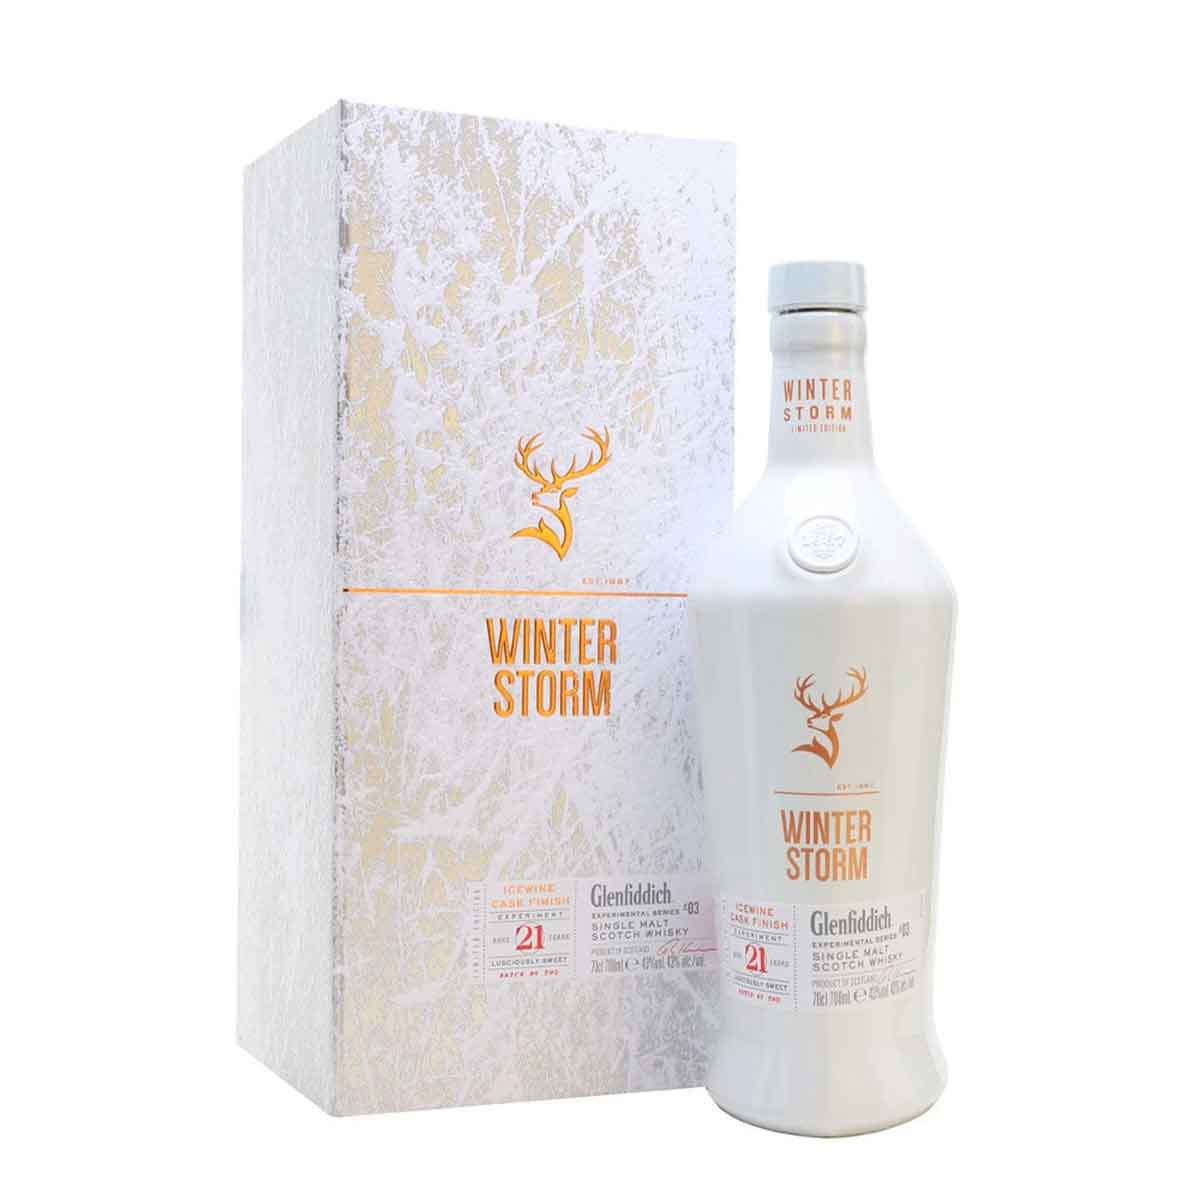 TAG Liquor Stores BC-GLENFIDDICH WINTER STORM 21 YEAR OLD SCOTCH WHISKY 750ML